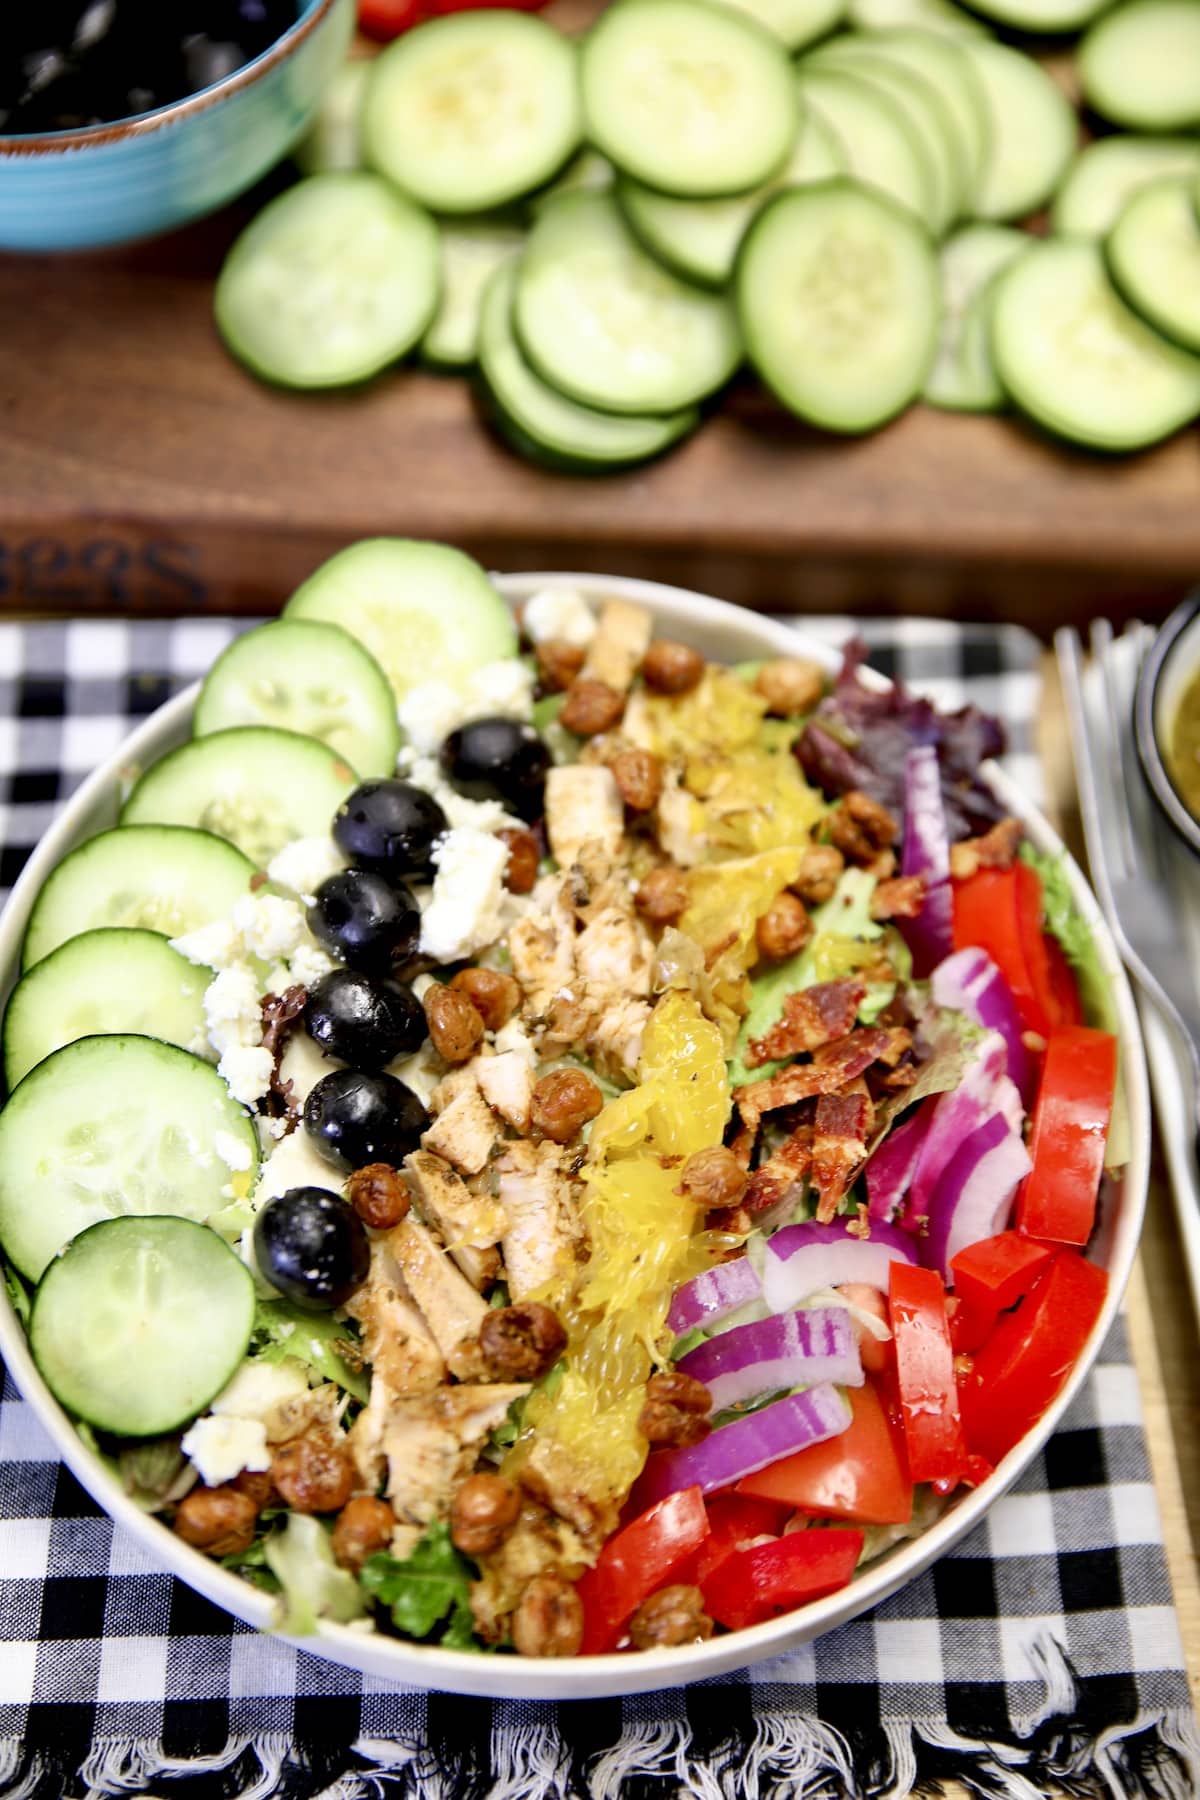 Bowl of Greek salad with grilled chicken.